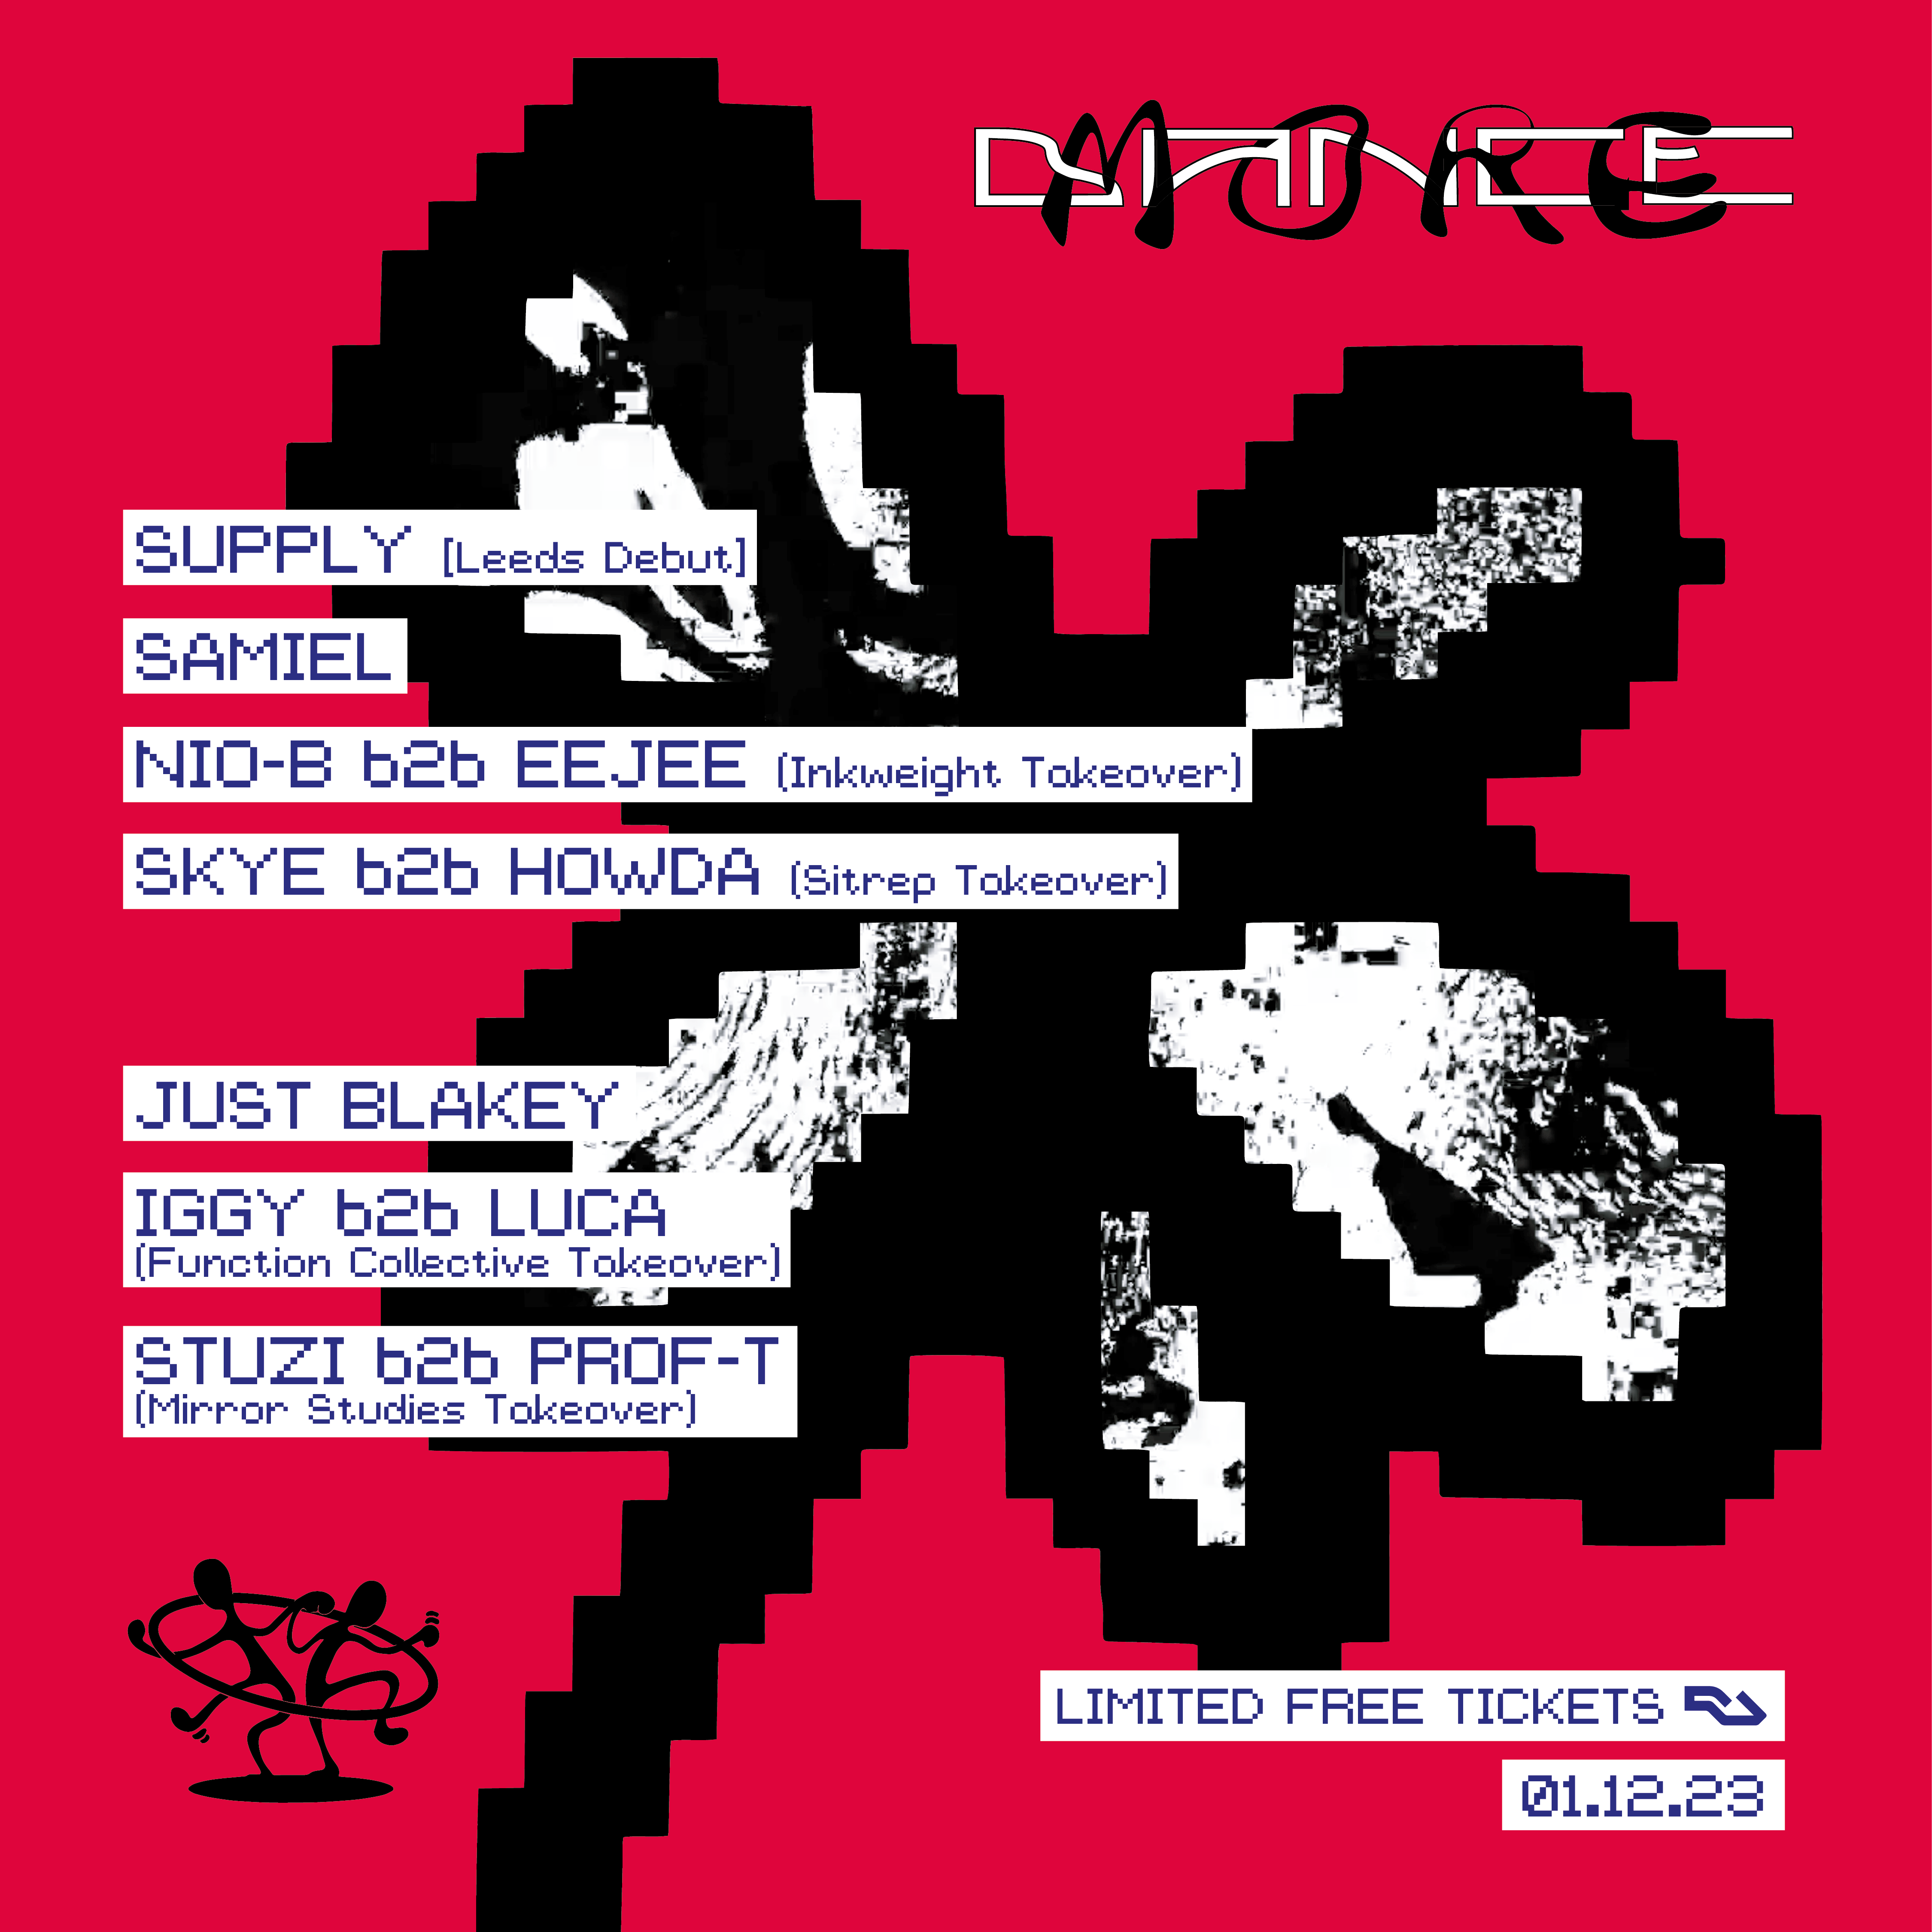 Dance More: SUPPLY, Samiel, Function Collective, Just Blakey, Inkweight & More - Página frontal